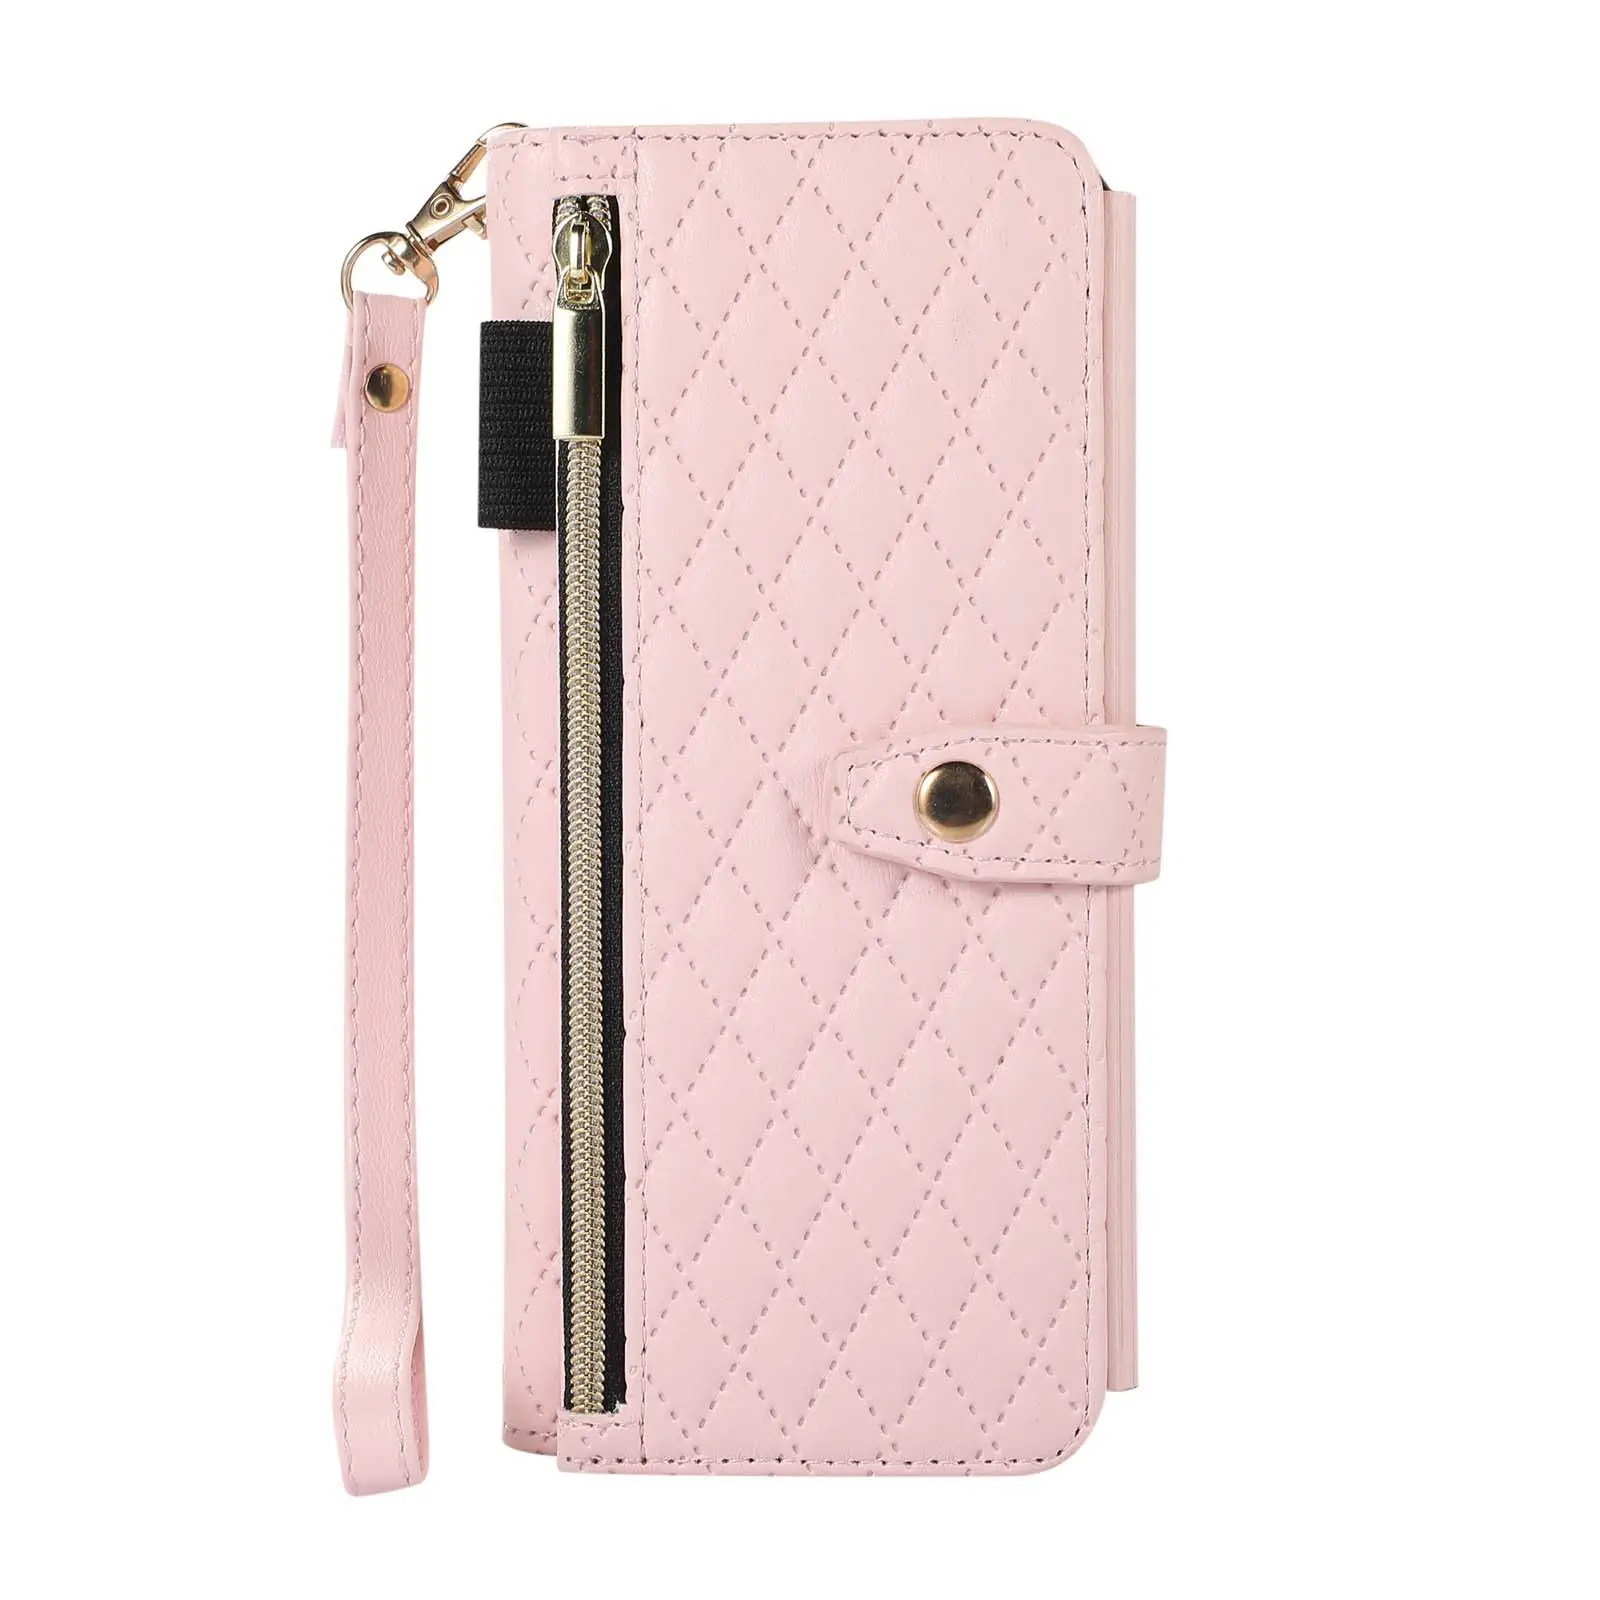 Mobile Phone Shell Folding Leather Phone Case Cover For Samsung